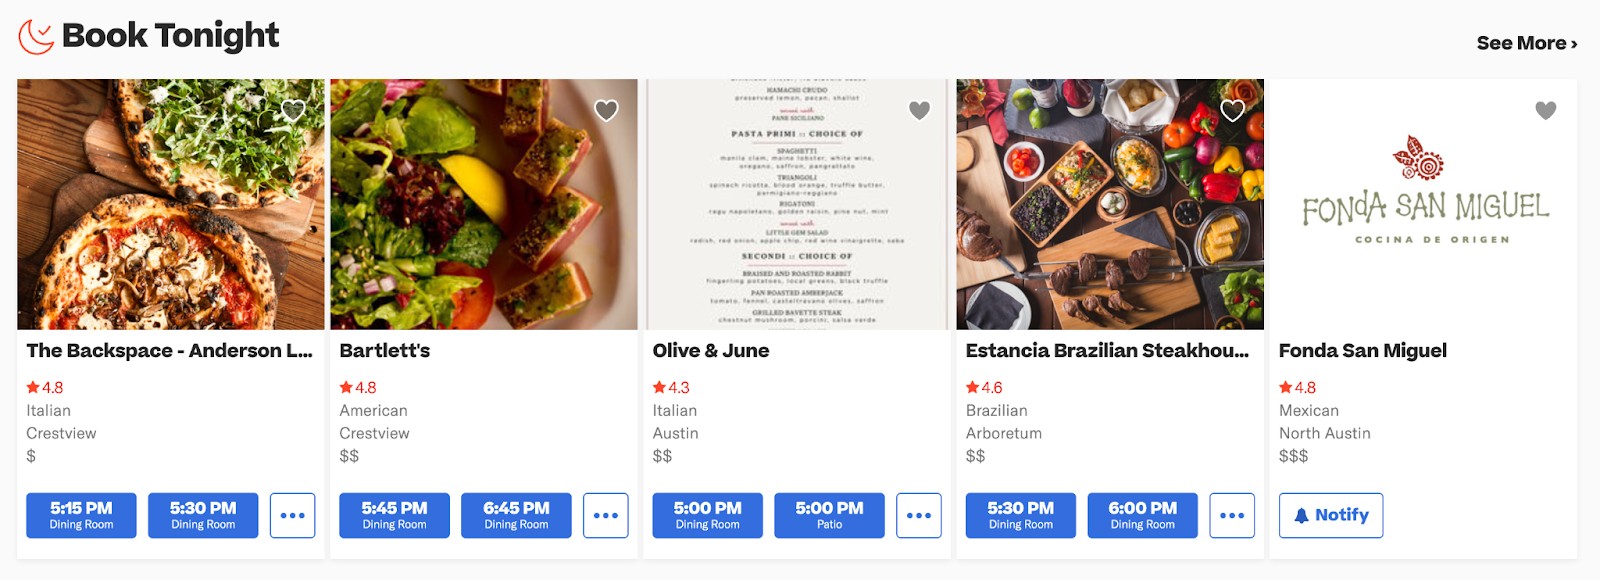 Restaurant marketing ideas: Reservation platform Resy displays restaurant availability for quick and convenient booking.